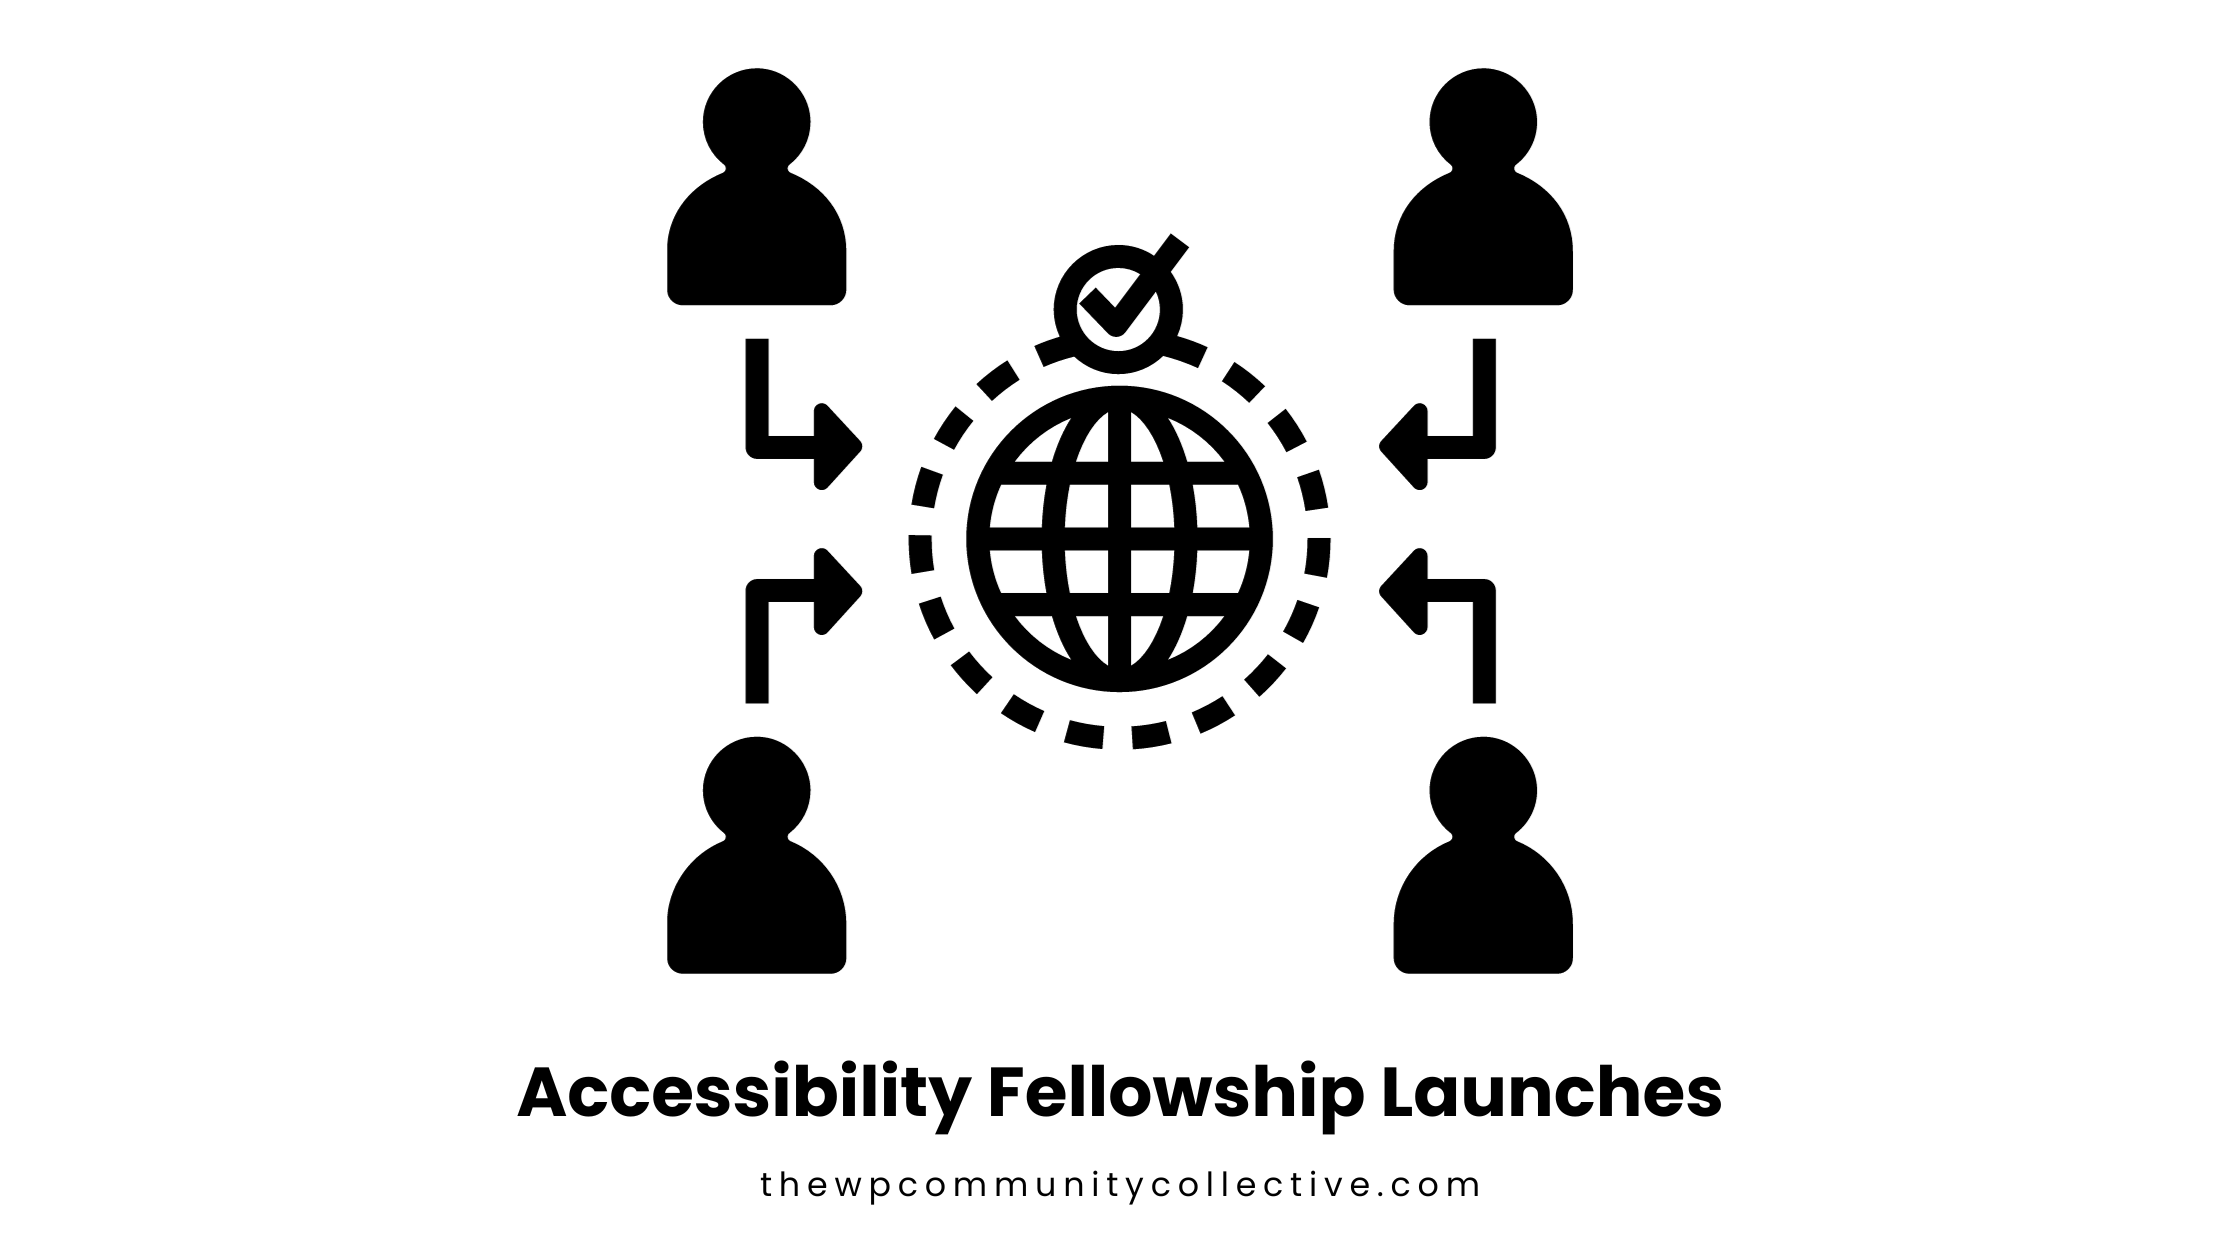 PRESS RELEASE: WP Community Collective Launches Inaugural Accessibility Fellowship with Alex Stine